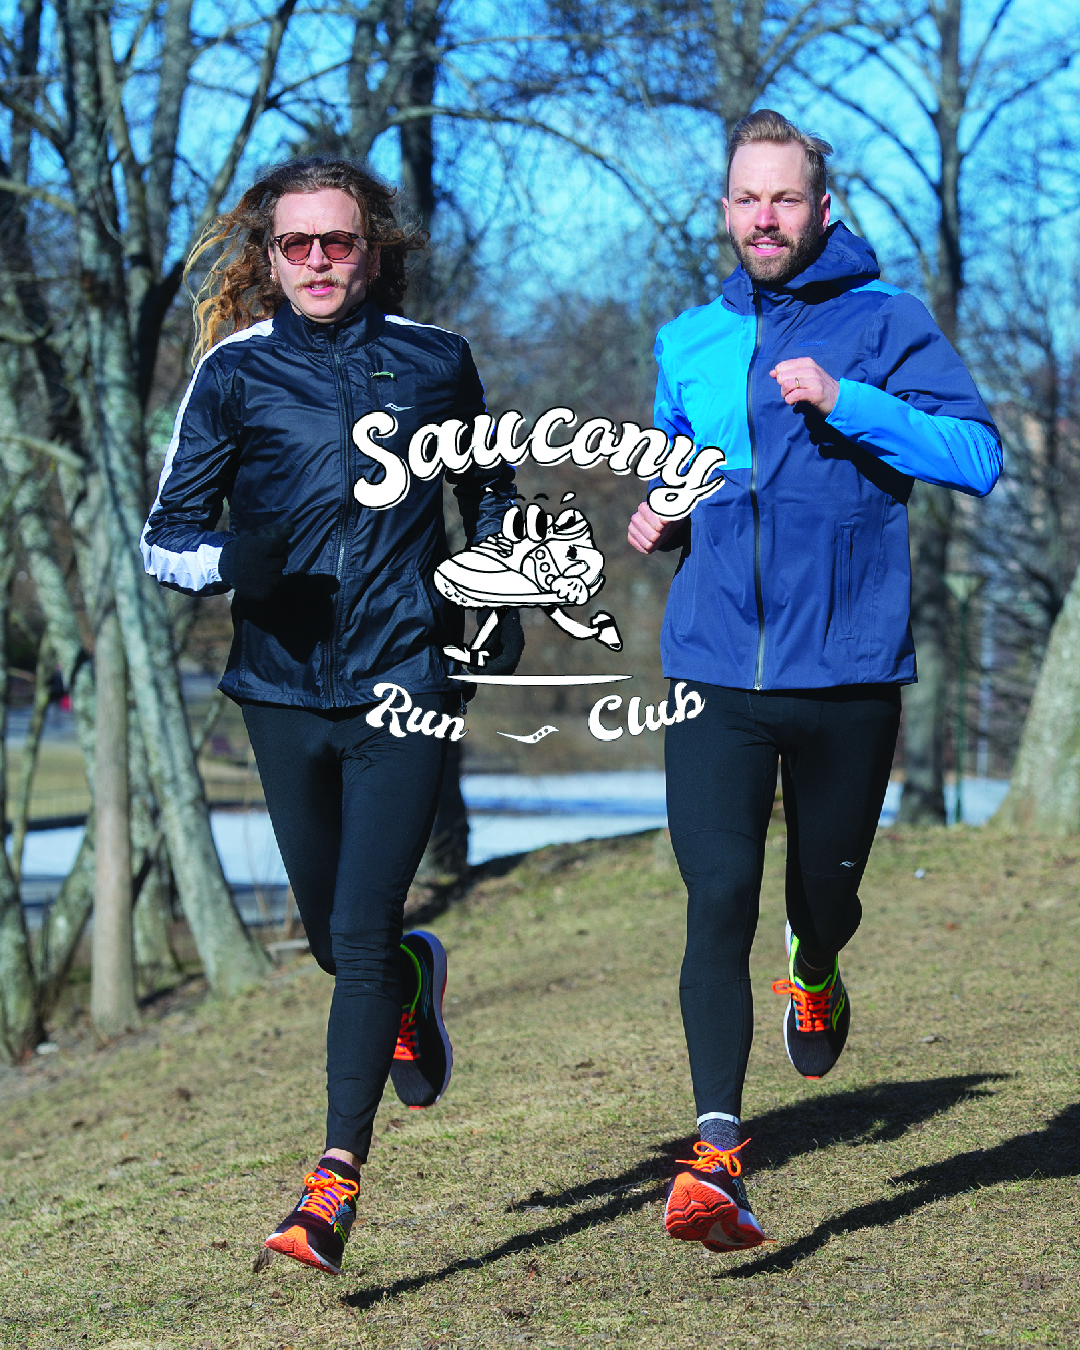 Join the Saucony Run Club!